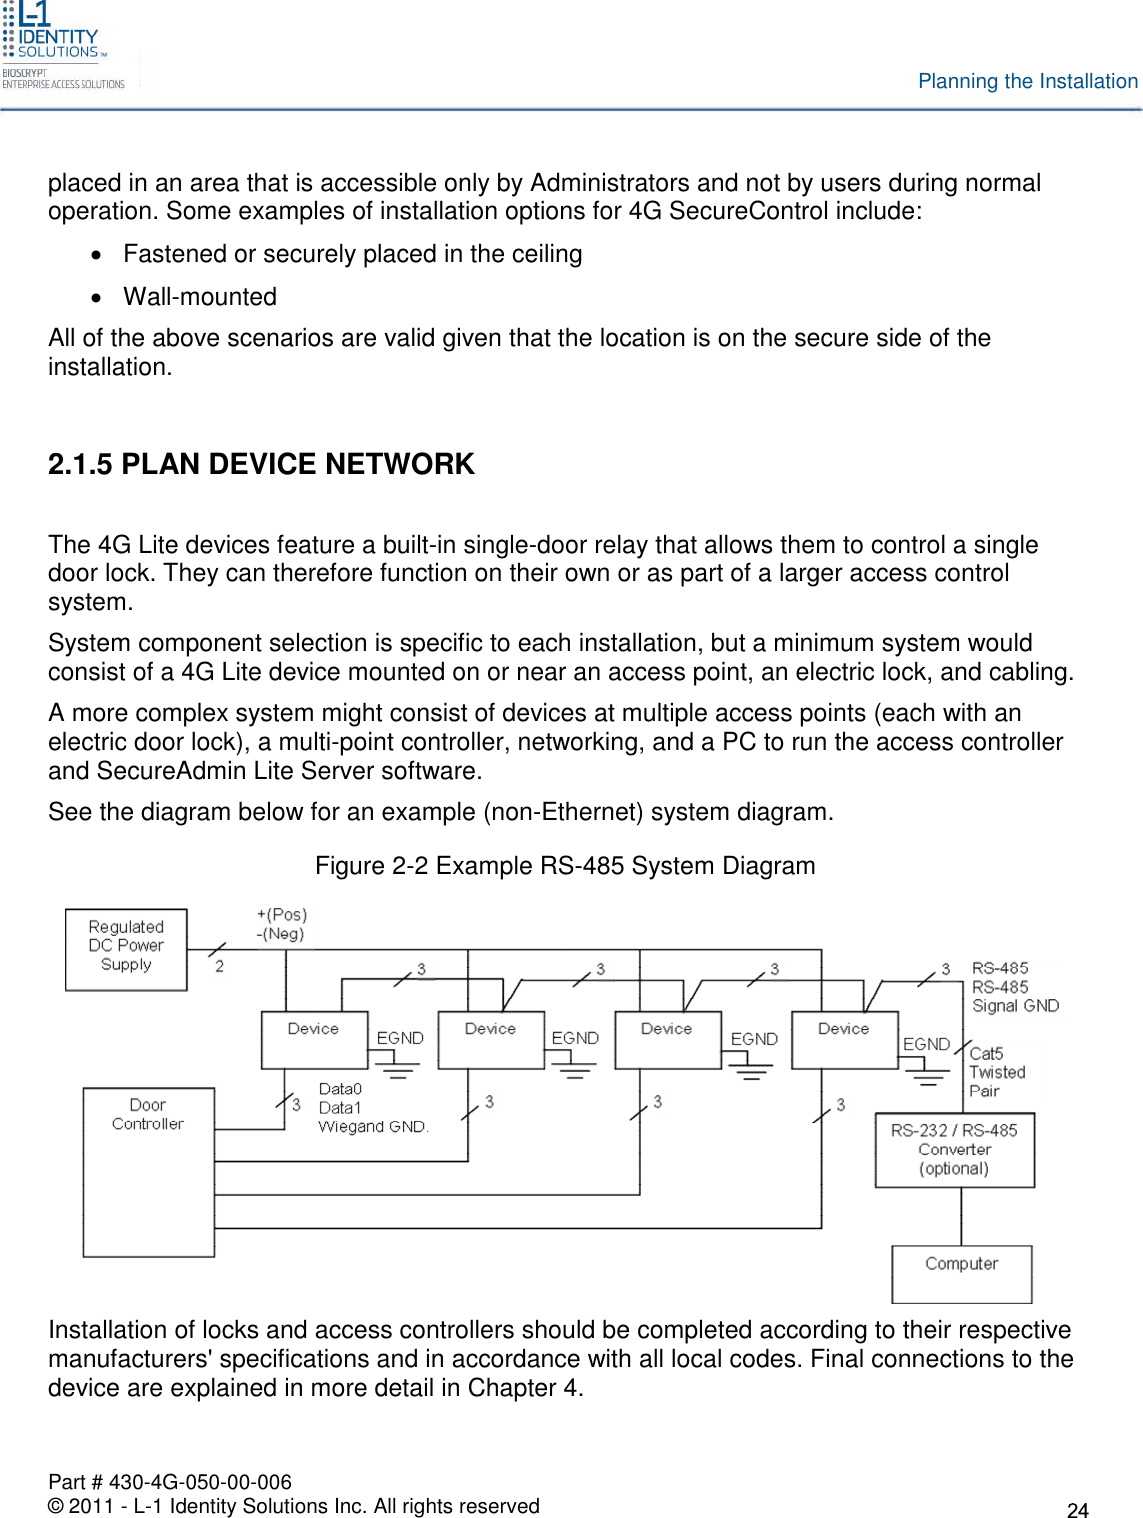 Part # 430-4G-050-00-006© 2011 - L-1 Identity Solutions Inc. All rights reservedPlanning the Installationplaced in an area that is accessible only by Administrators and not by users during normaloperation. Some examples of installation options for 4G SecureControl include:Fastened or securely placed in the ceilingWall-mountedAll of the above scenarios are valid given that the location is on the secure side of theinstallation.2.1.5 PLAN DEVICE NETWORKThe 4G Lite devices feature a built-in single-door relay that allows them to control a singledoor lock. They can therefore function on their own or as part of a larger access controlsystem.System component selection is specific to each installation, but a minimum system wouldconsist of a 4G Lite device mounted on or near an access point, an electric lock, and cabling.A more complex system might consist of devices at multiple access points (each with anelectric door lock), a multi-point controller, networking, and a PC to run the access controllerand SecureAdmin Lite Server software.See the diagram below for an example (non-Ethernet) system diagram.Figure 2-2 Example RS-485 System DiagramInstallation of locks and access controllers should be completed according to their respectivemanufacturers&apos; specifications and in accordance with all local codes. Final connections to thedevice are explained in more detail in Chapter 4.